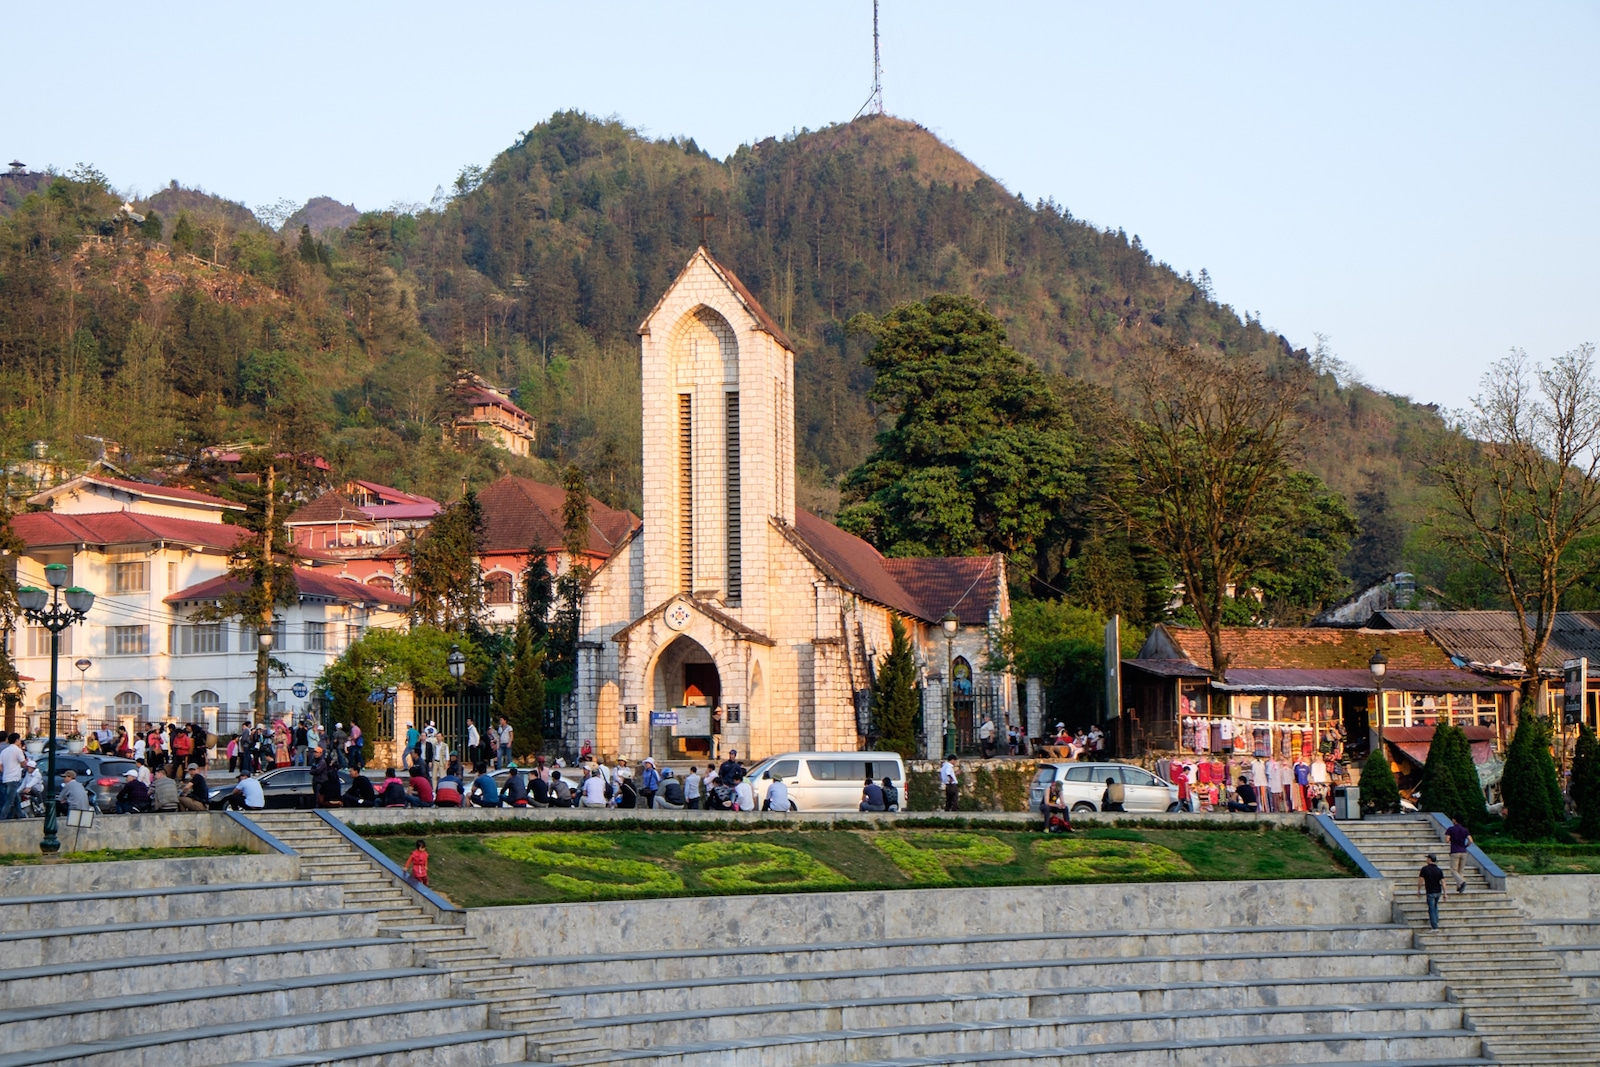 Sa Pa Stone Church, also known as the Notre Dame Cathedral Sapa, is a historic and cultural landmark in Sapa, Vietnam.